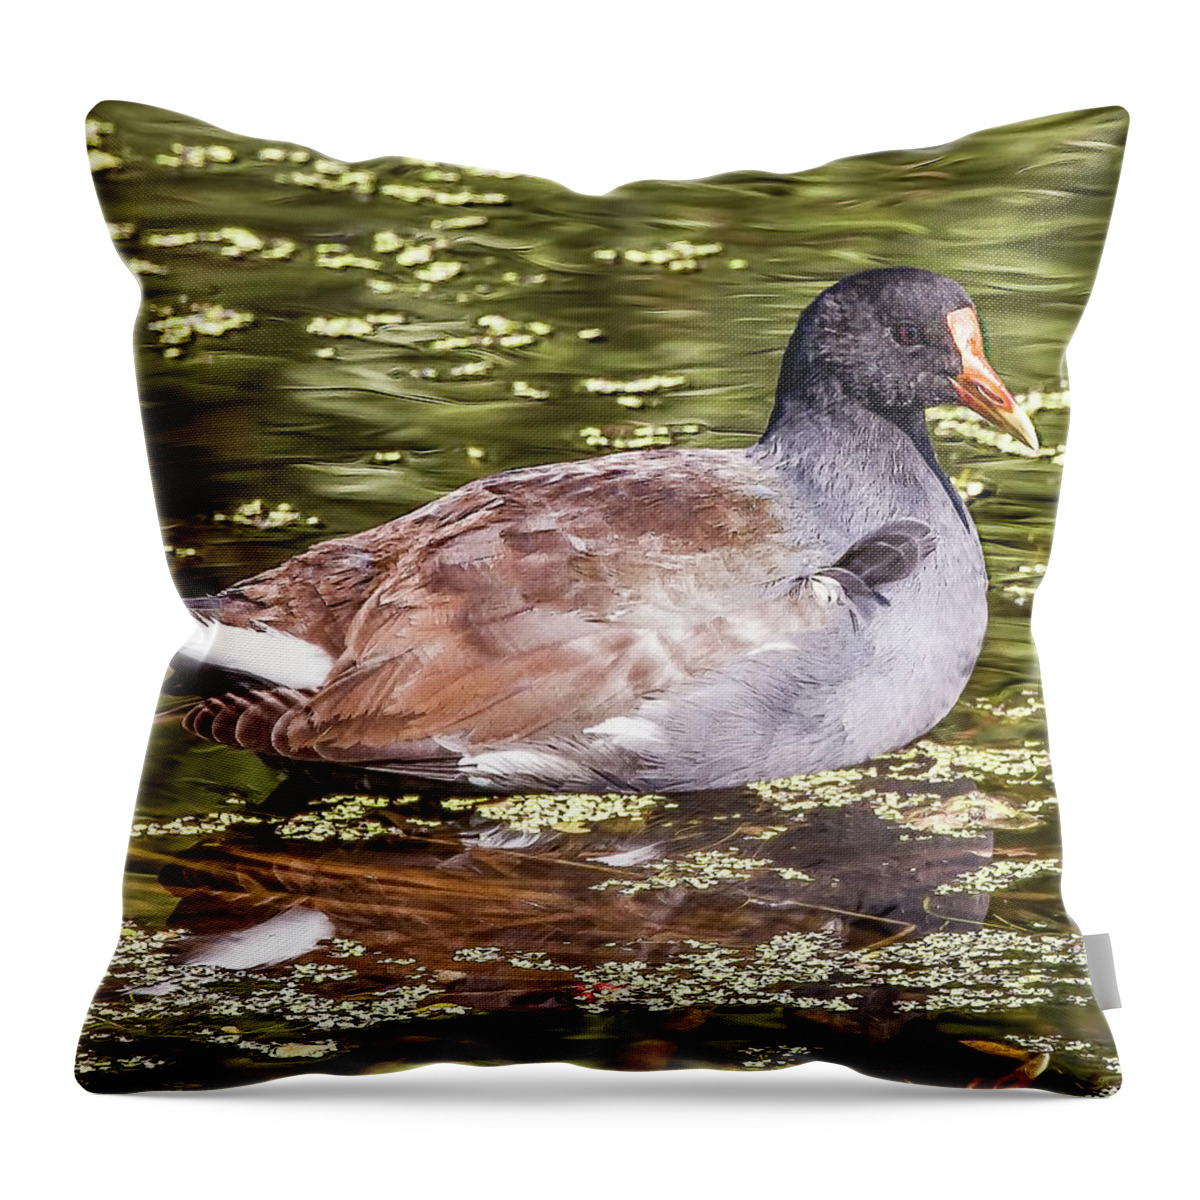 Common Gallinule Throw Pillow featuring the photograph Common Gallinule by Richard Goldman